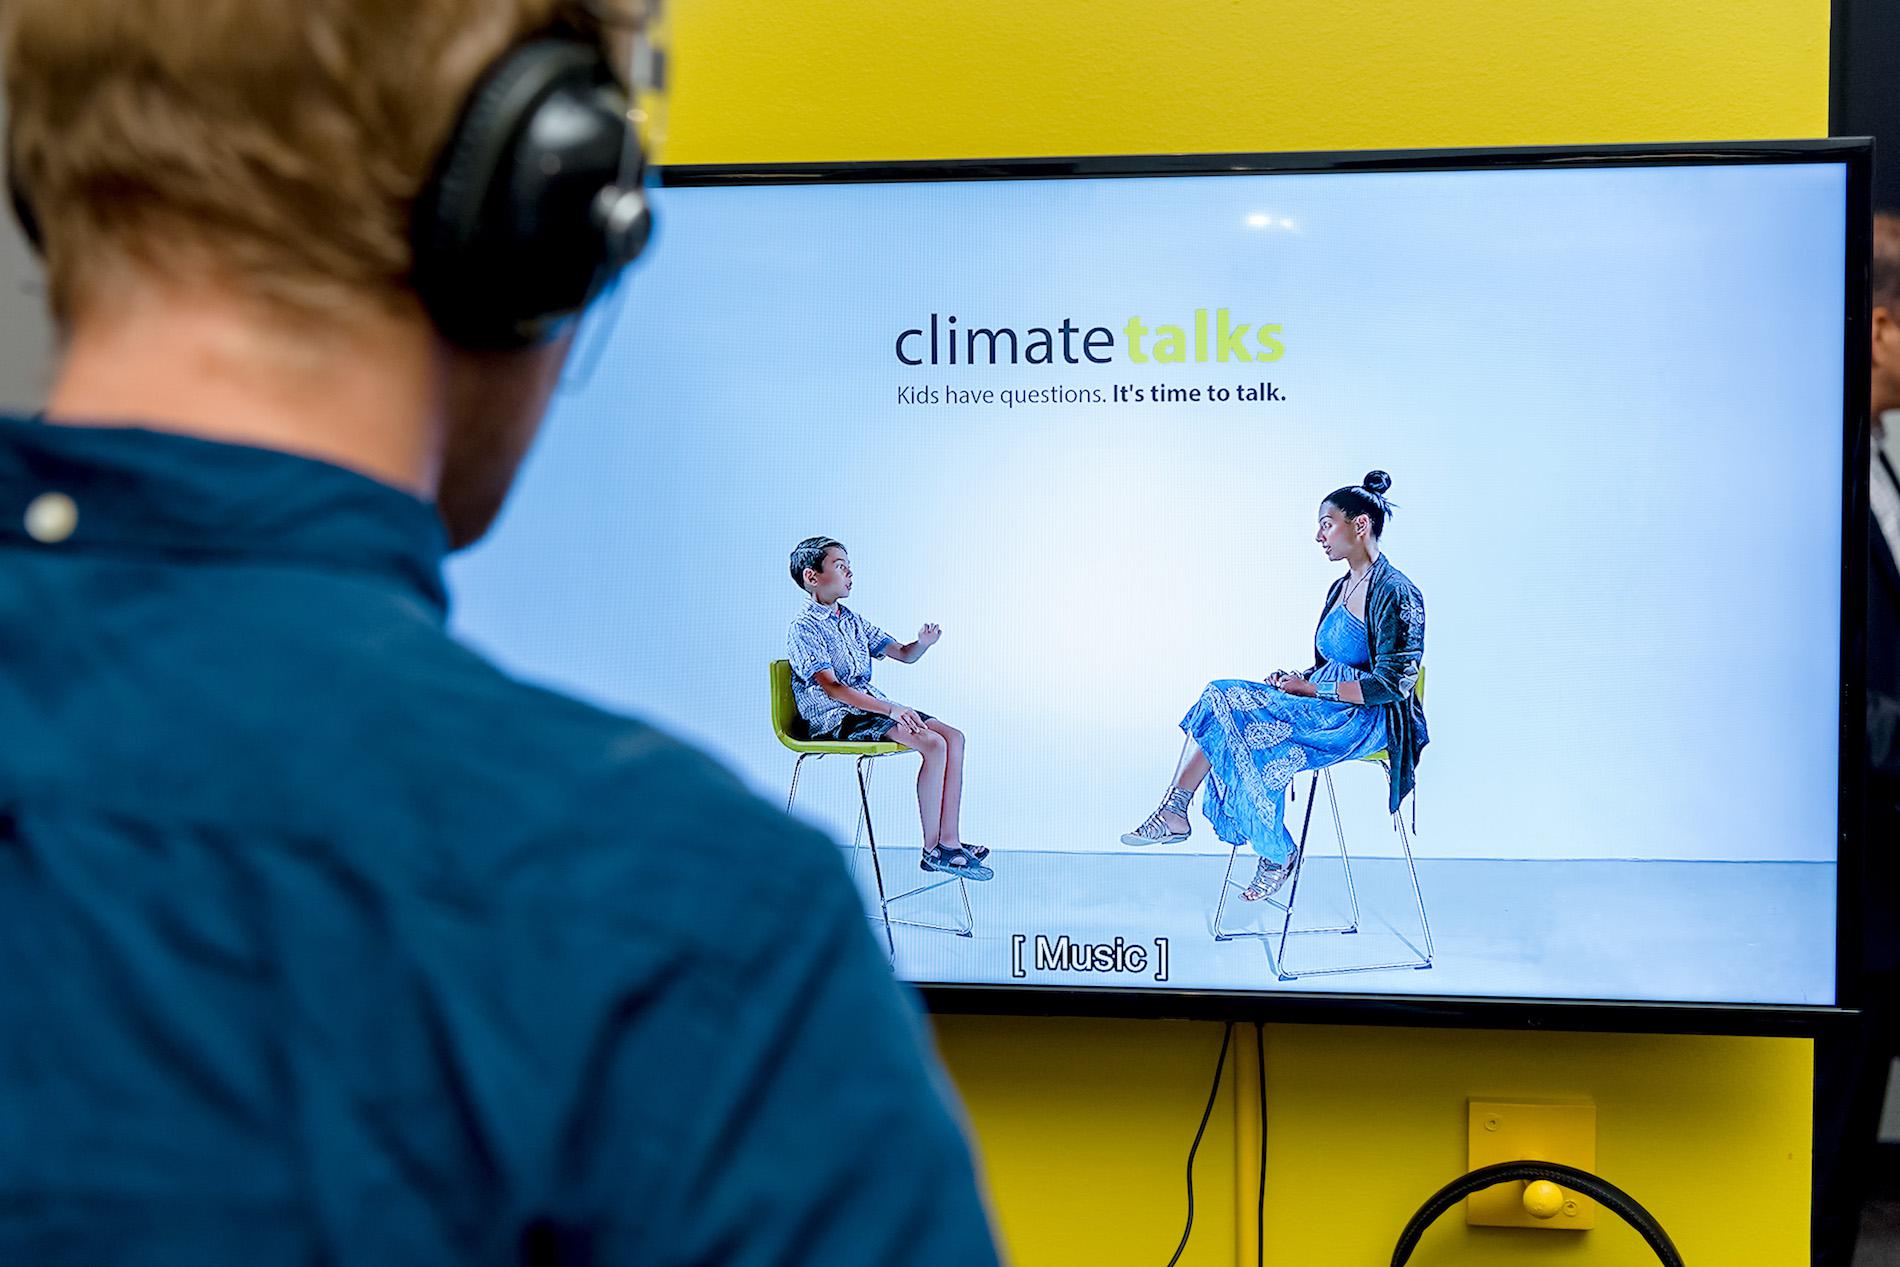 A man in a blue shirt watches a video on a screen, mounted on a yellow wall. On-screen text reads 'Climate Talks. Kids have questions. It's Time to Talk'